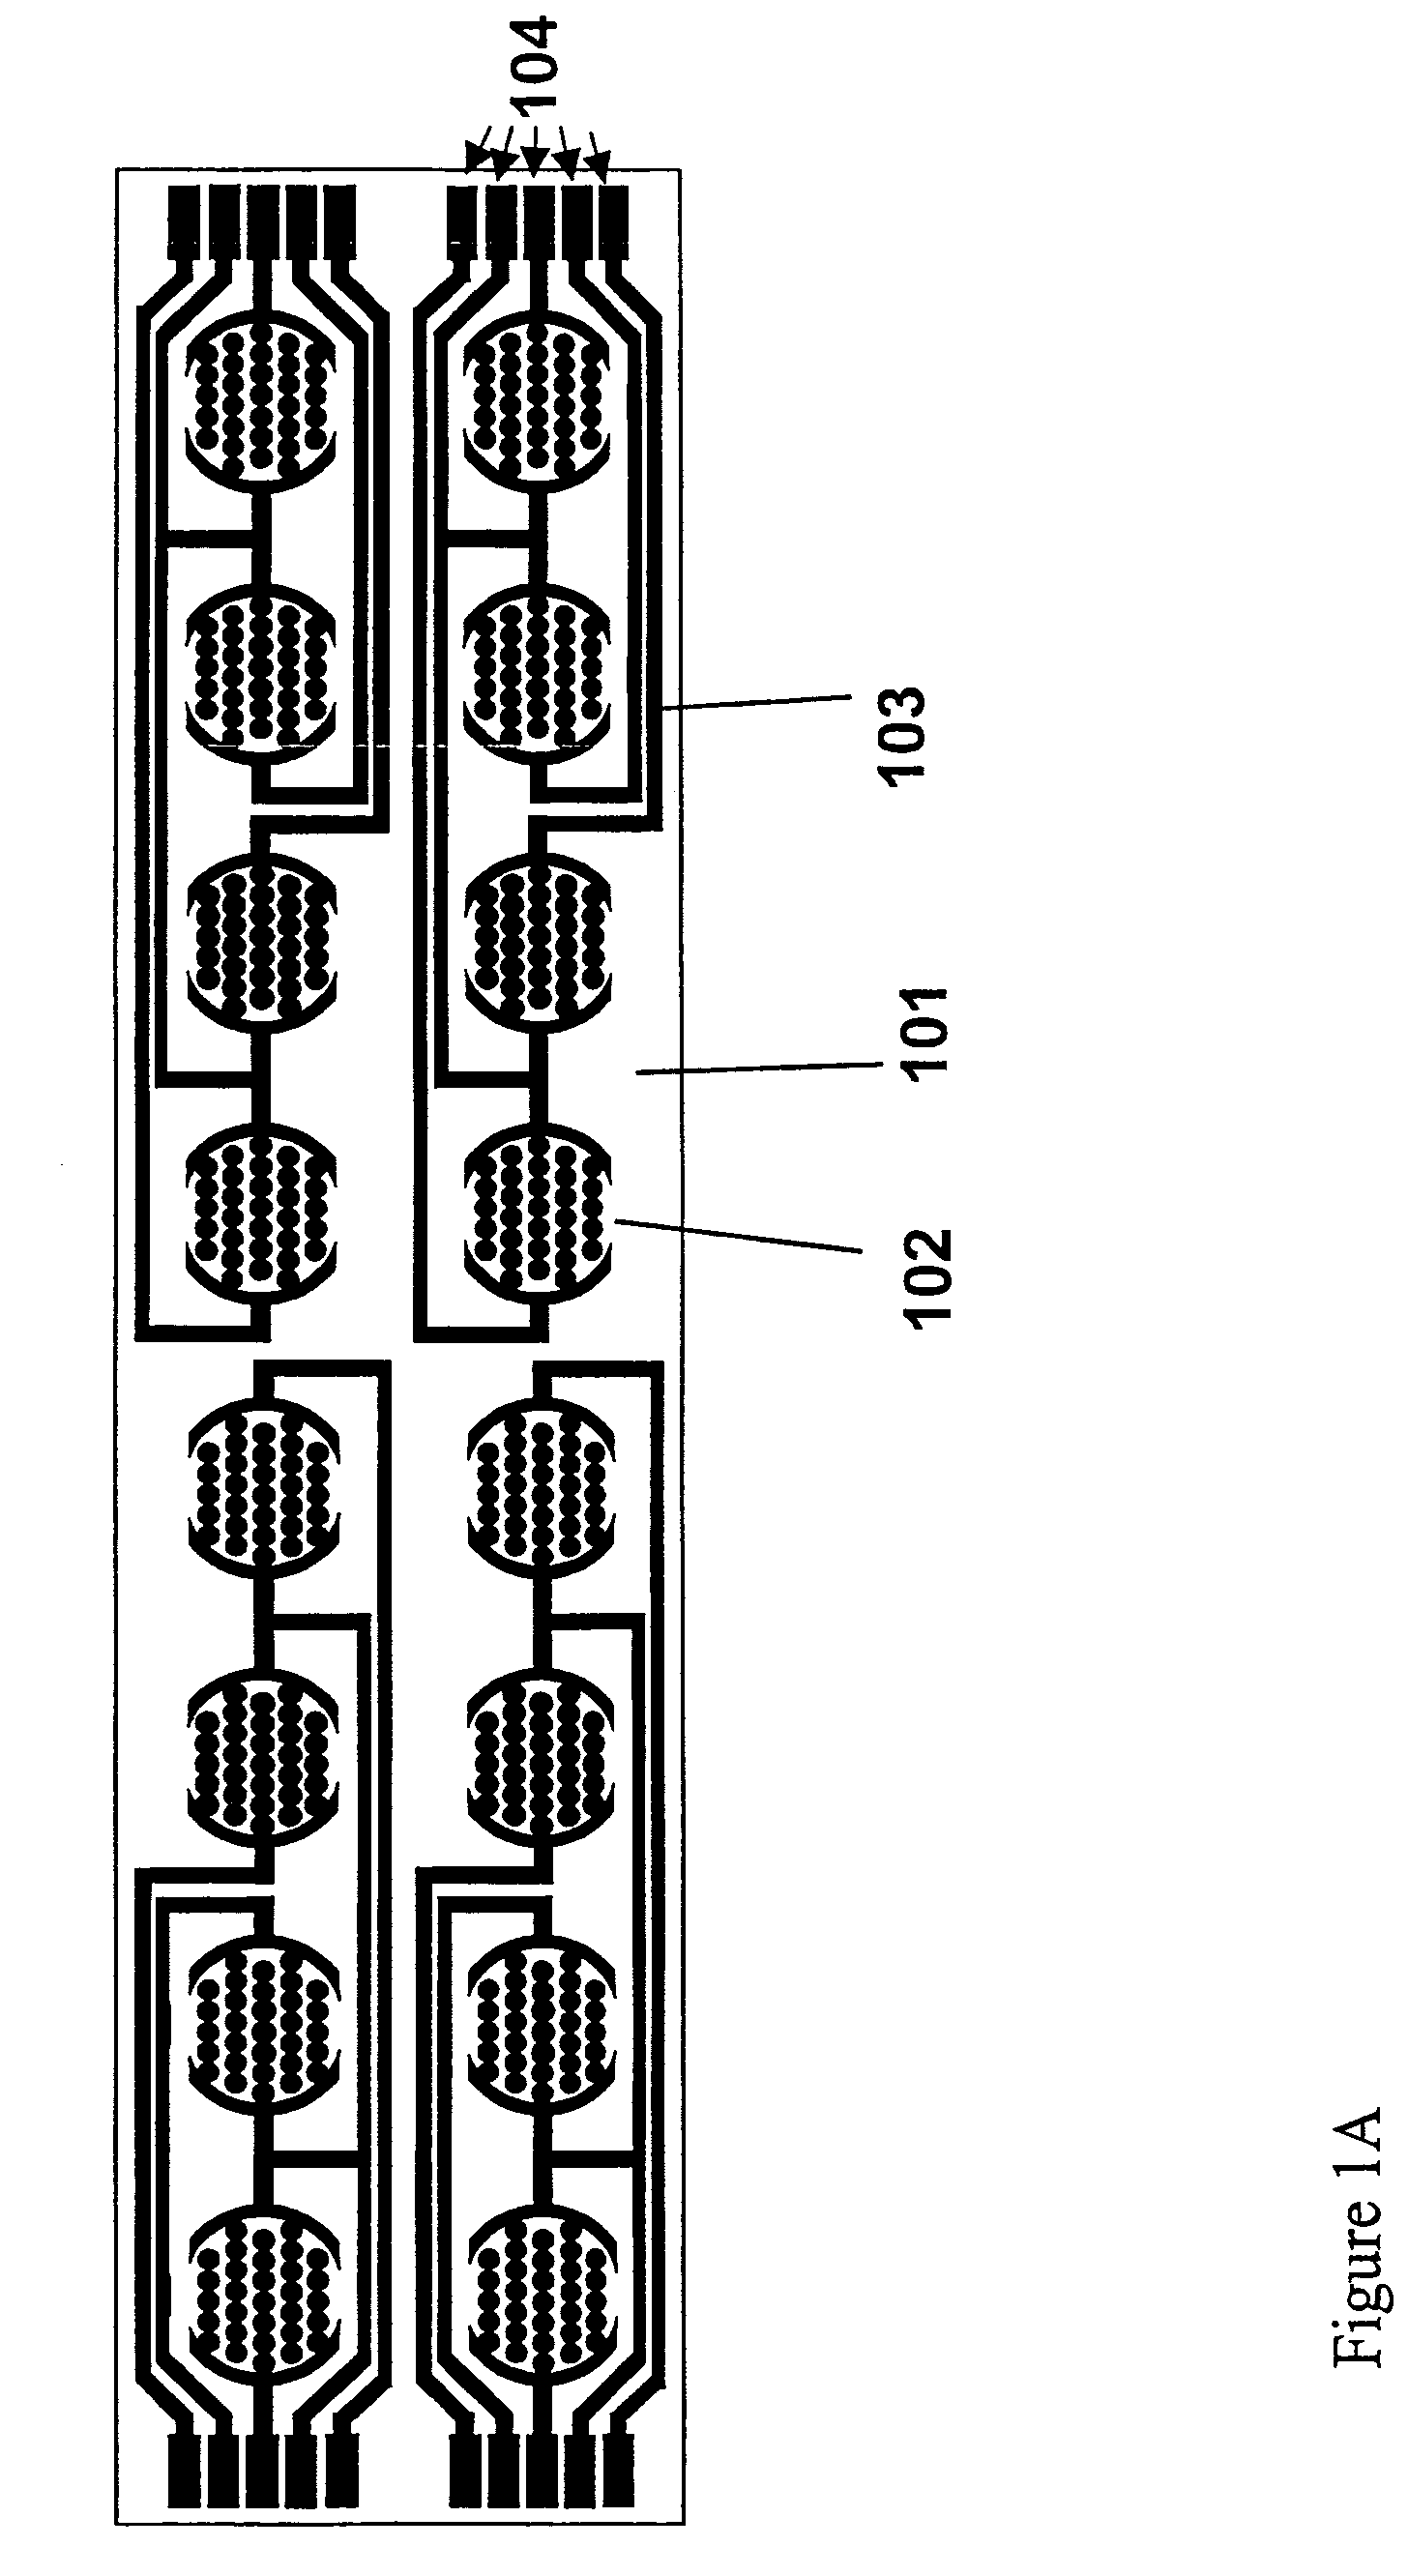 Method for assaying for natural killer, cytotoxic T-lymphocyte and neutrophil-mediated killing of target cells using real-time microelectronic cell sensing technology